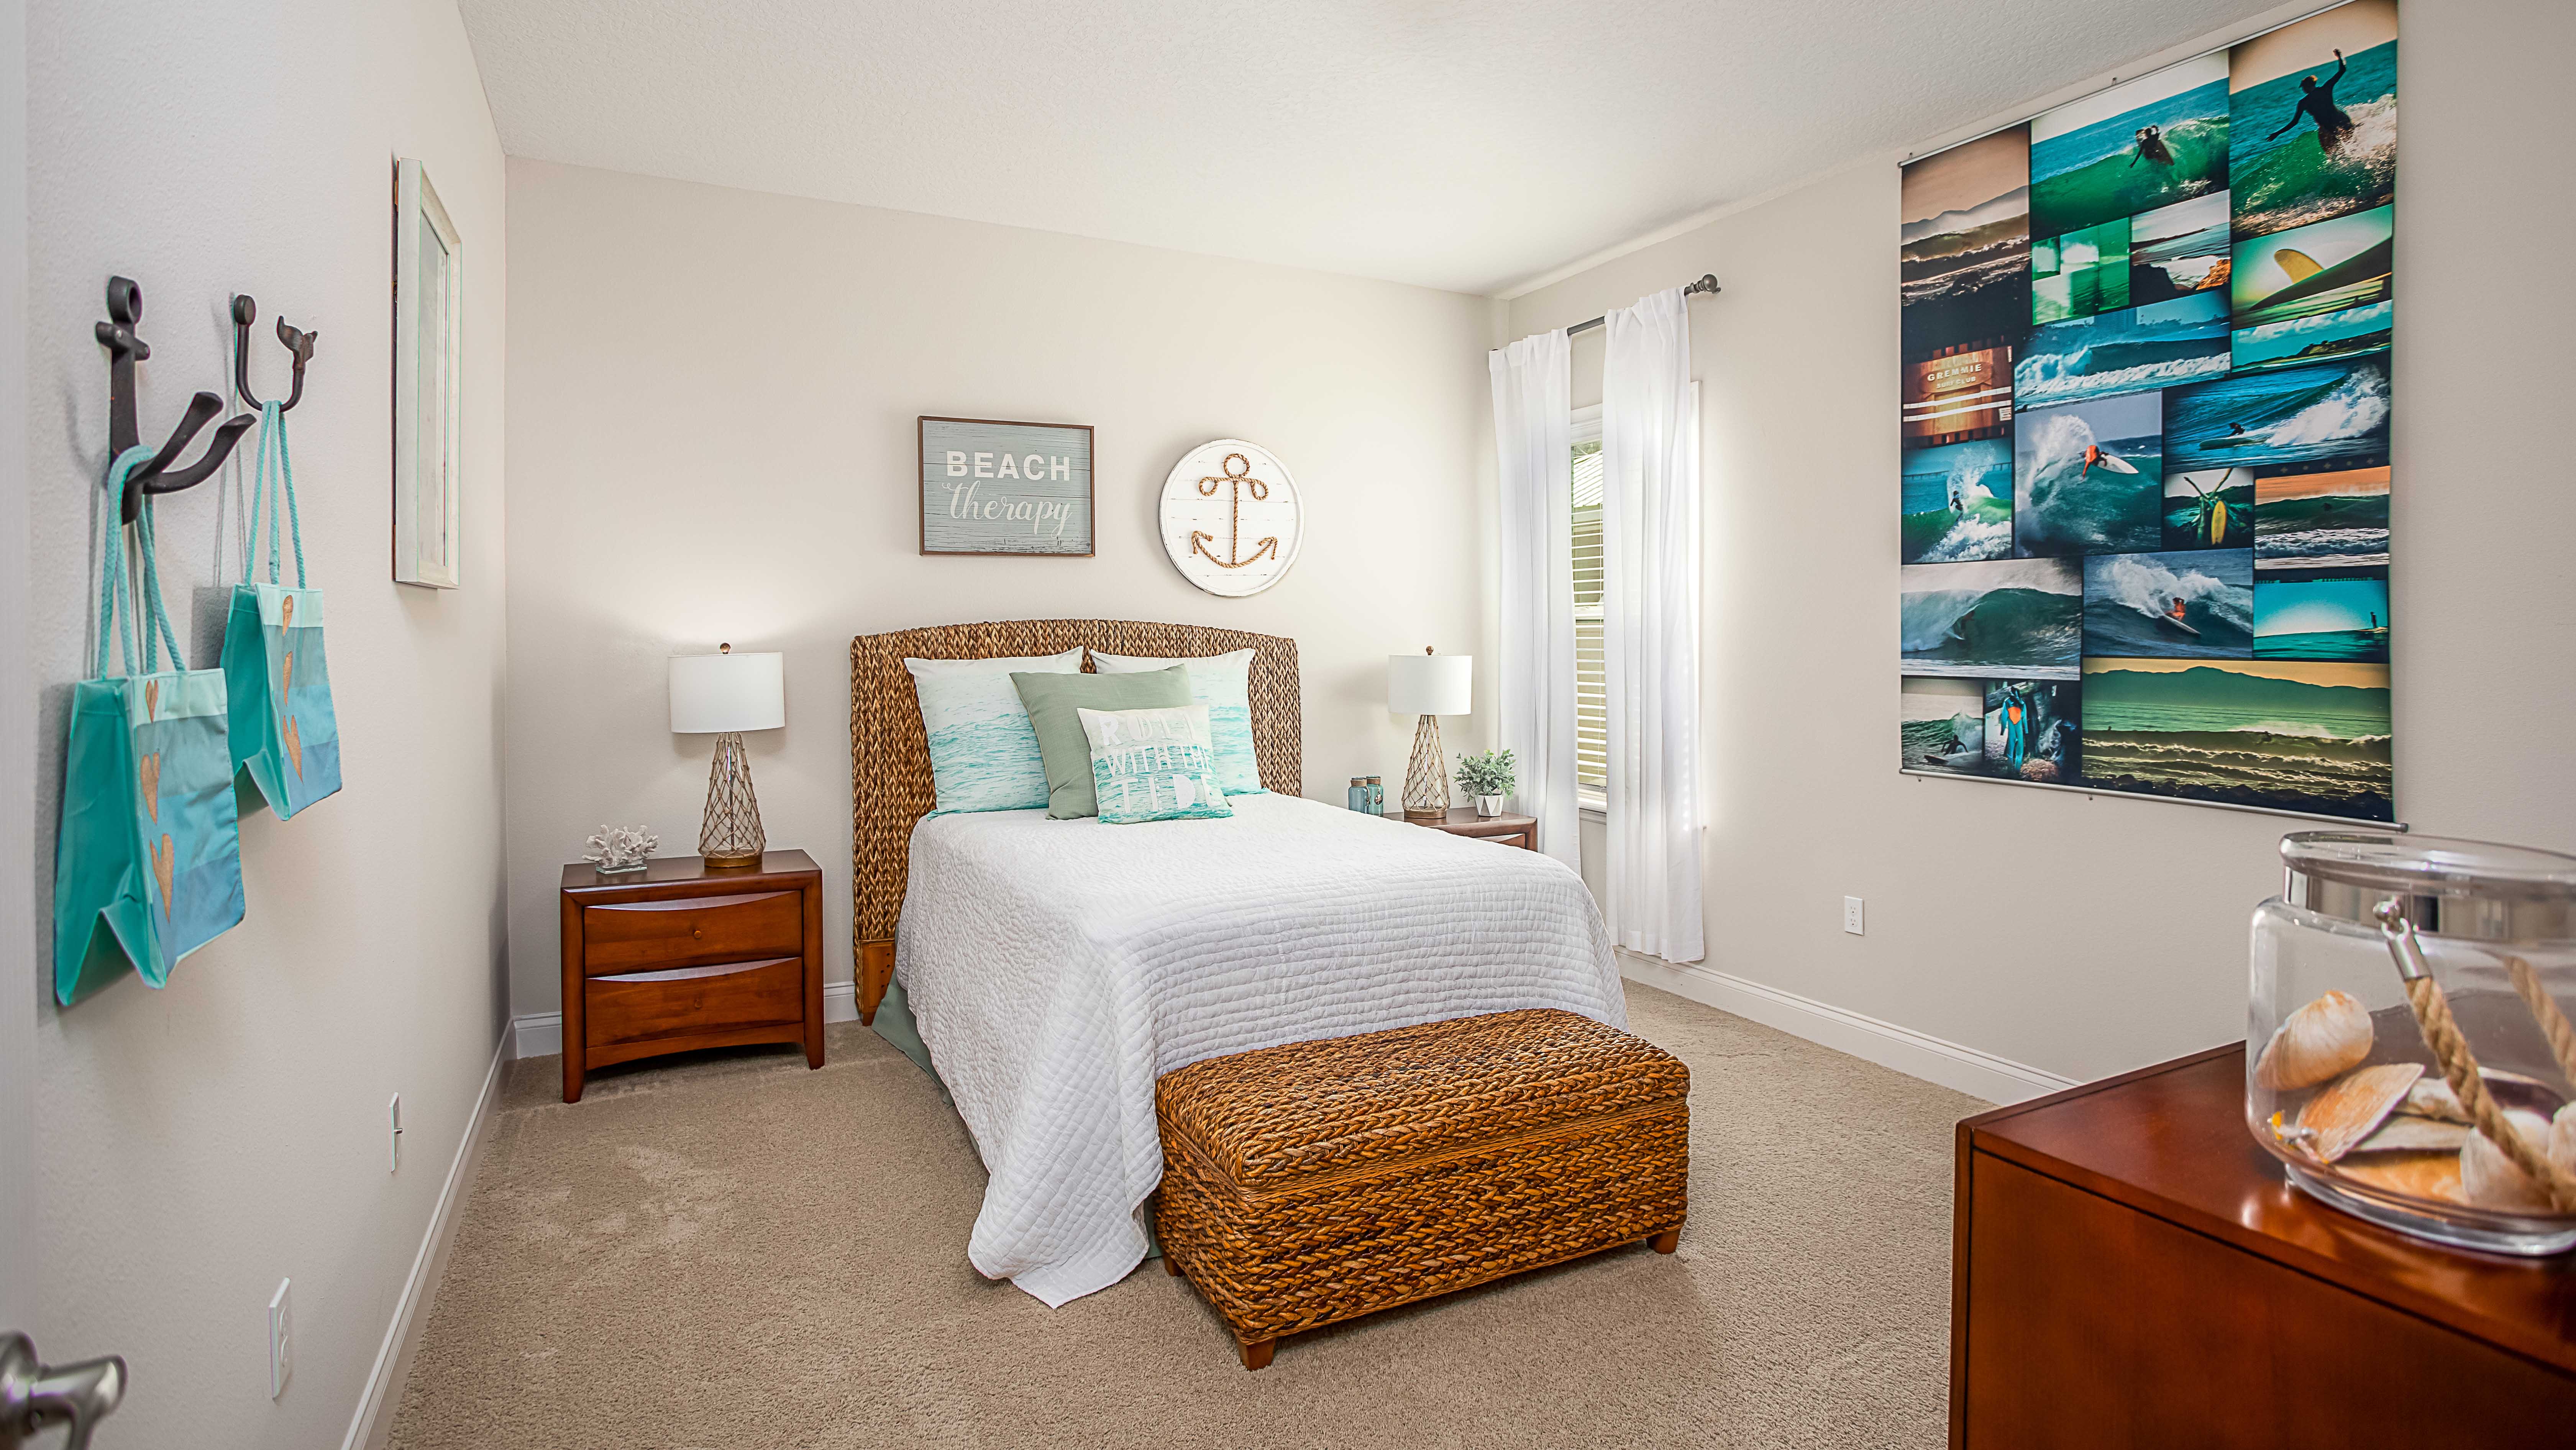 third bedroom of a new construction home in palm coast, fl